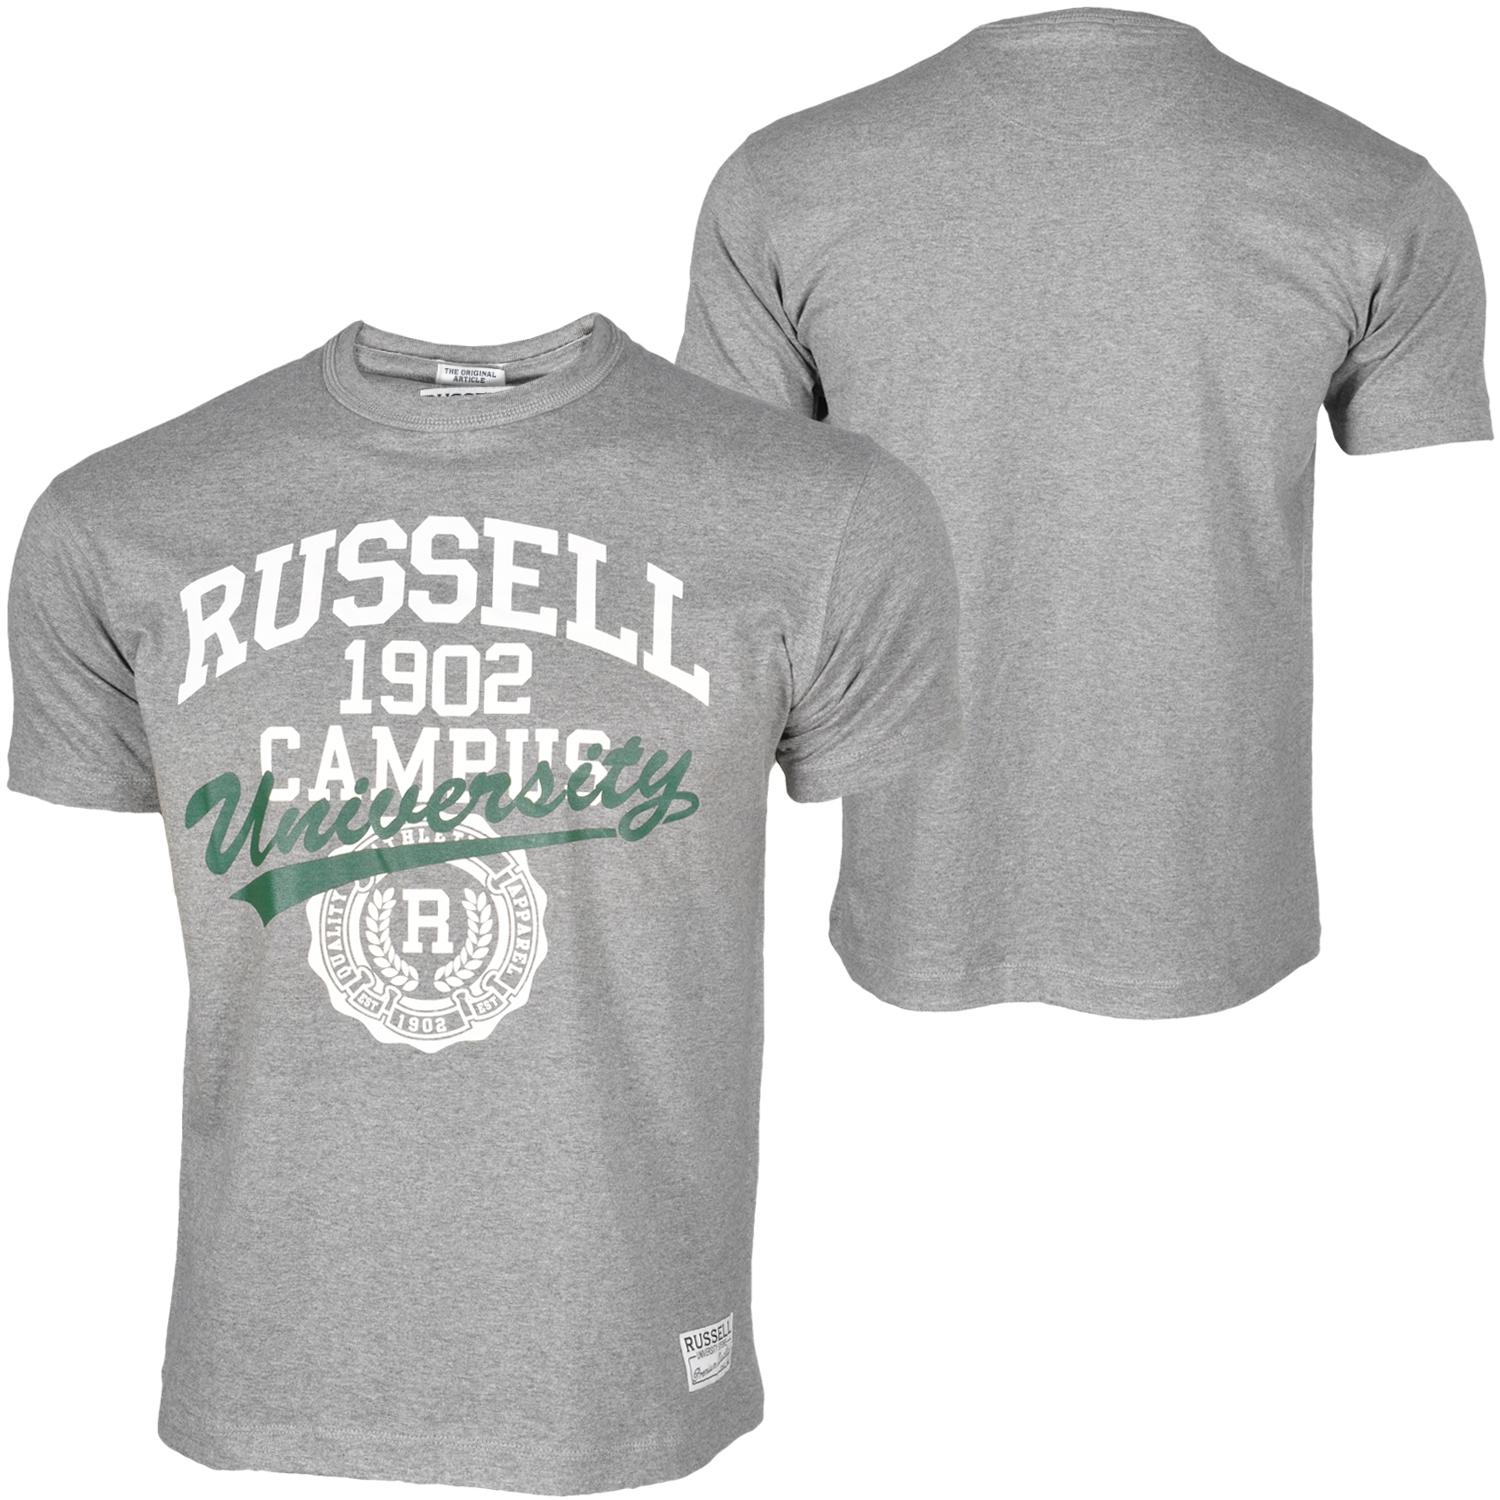 Foto Russell Athletic Campus T-shirt Gris foto 470255